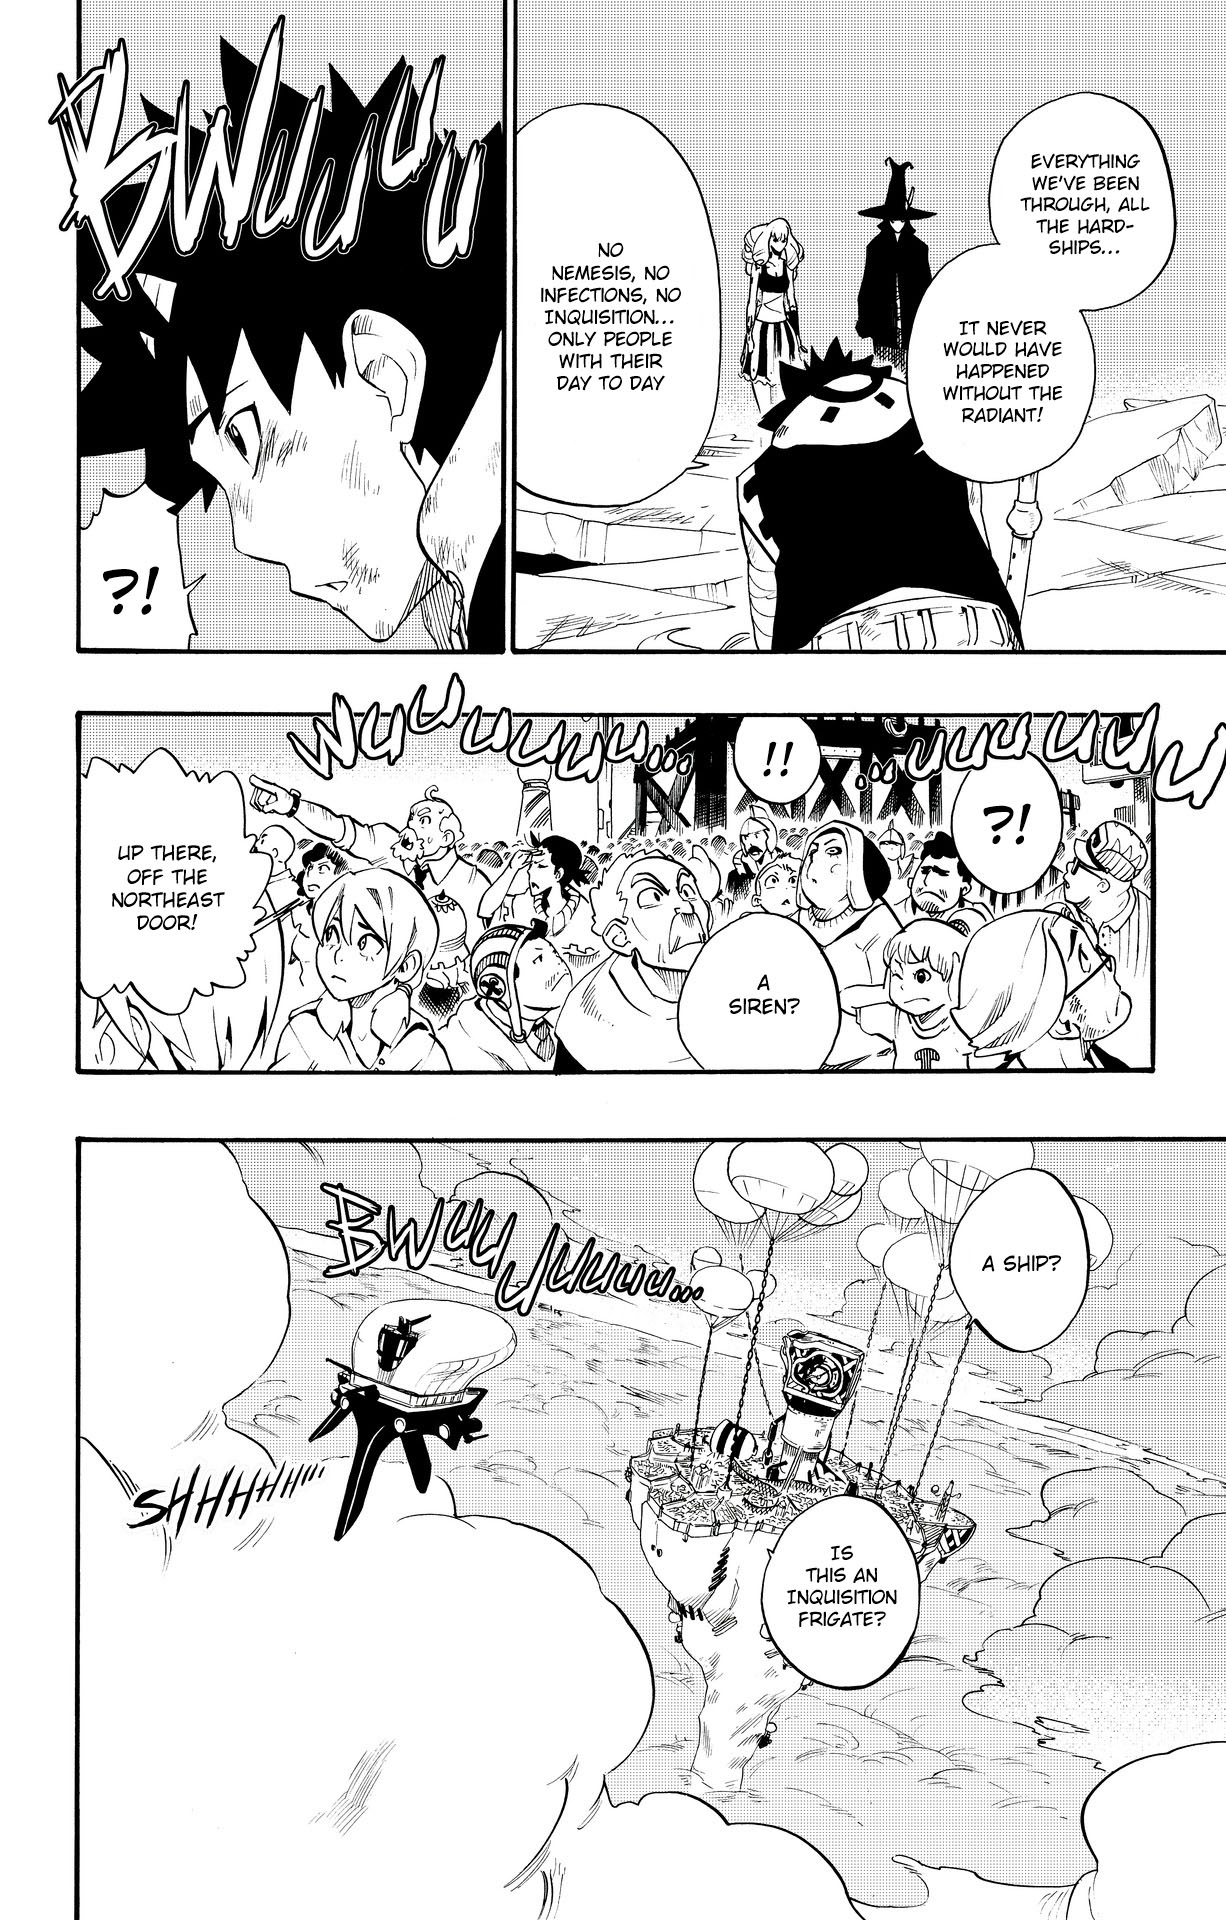 Radiant Vol. 4 Ch. 25 The Monster They Thought They Saw